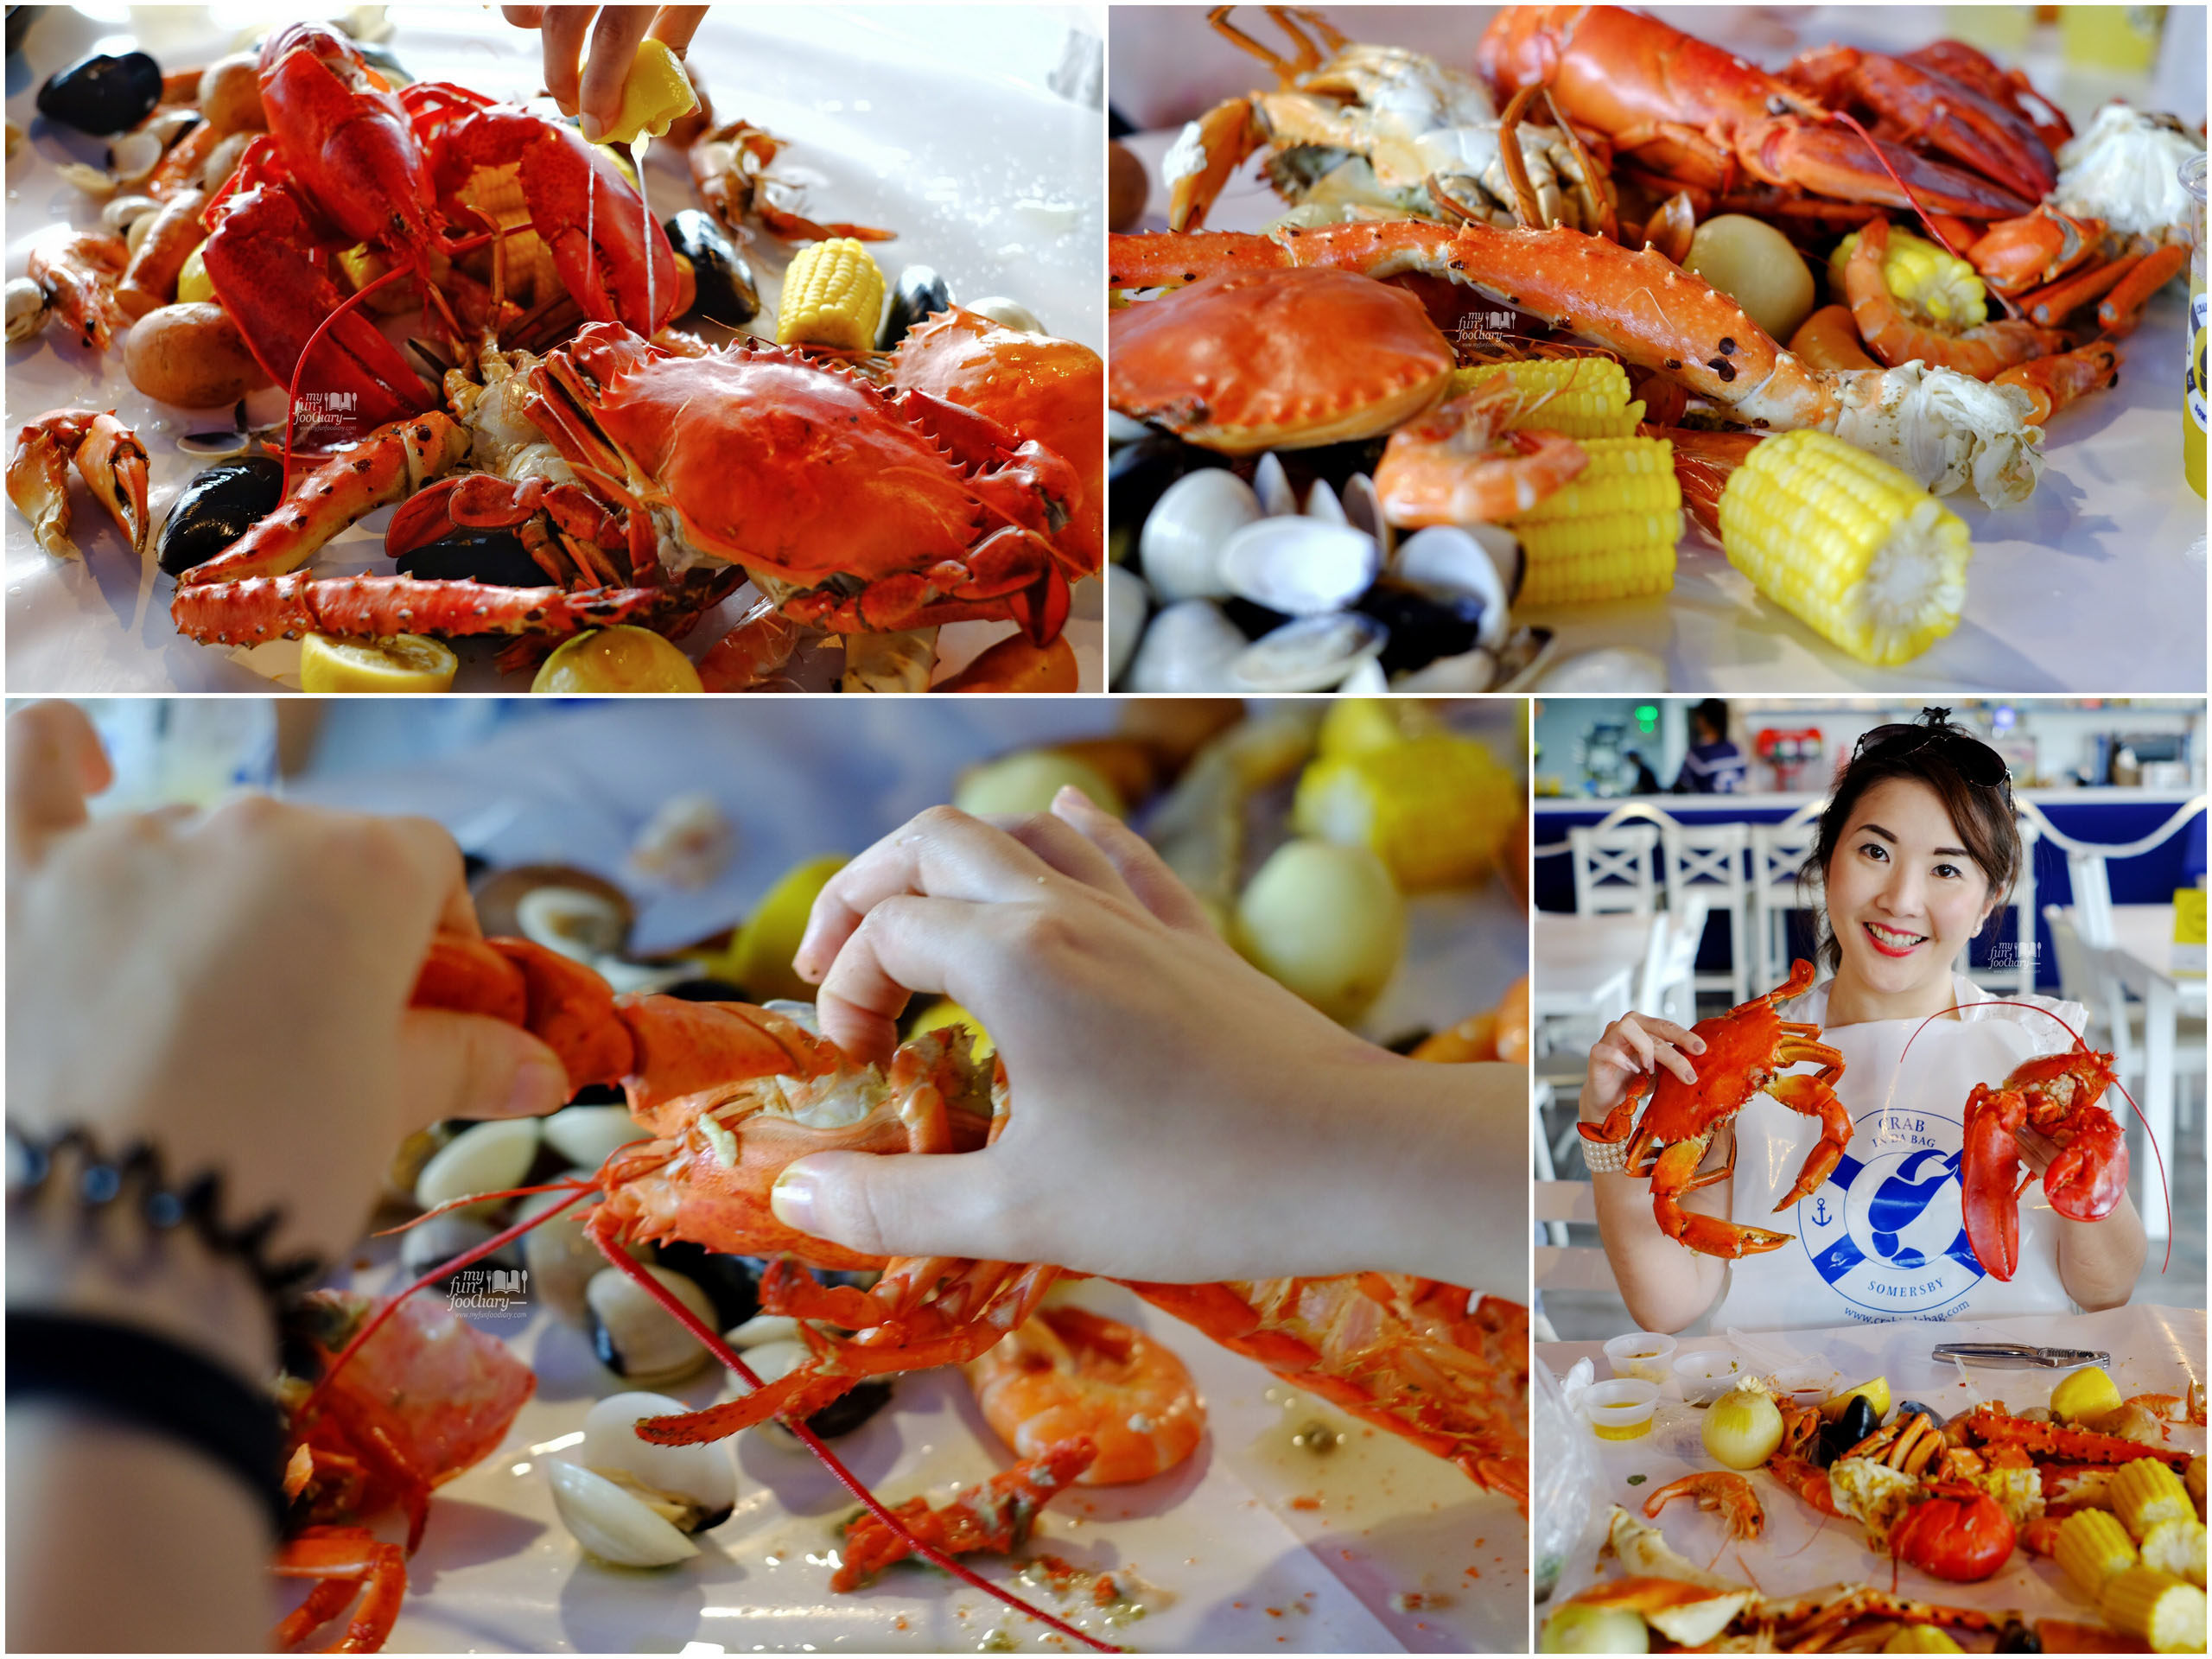 Awesome Fresh Seafood at Crab in da Bag Singapore by Myfunfoodiary